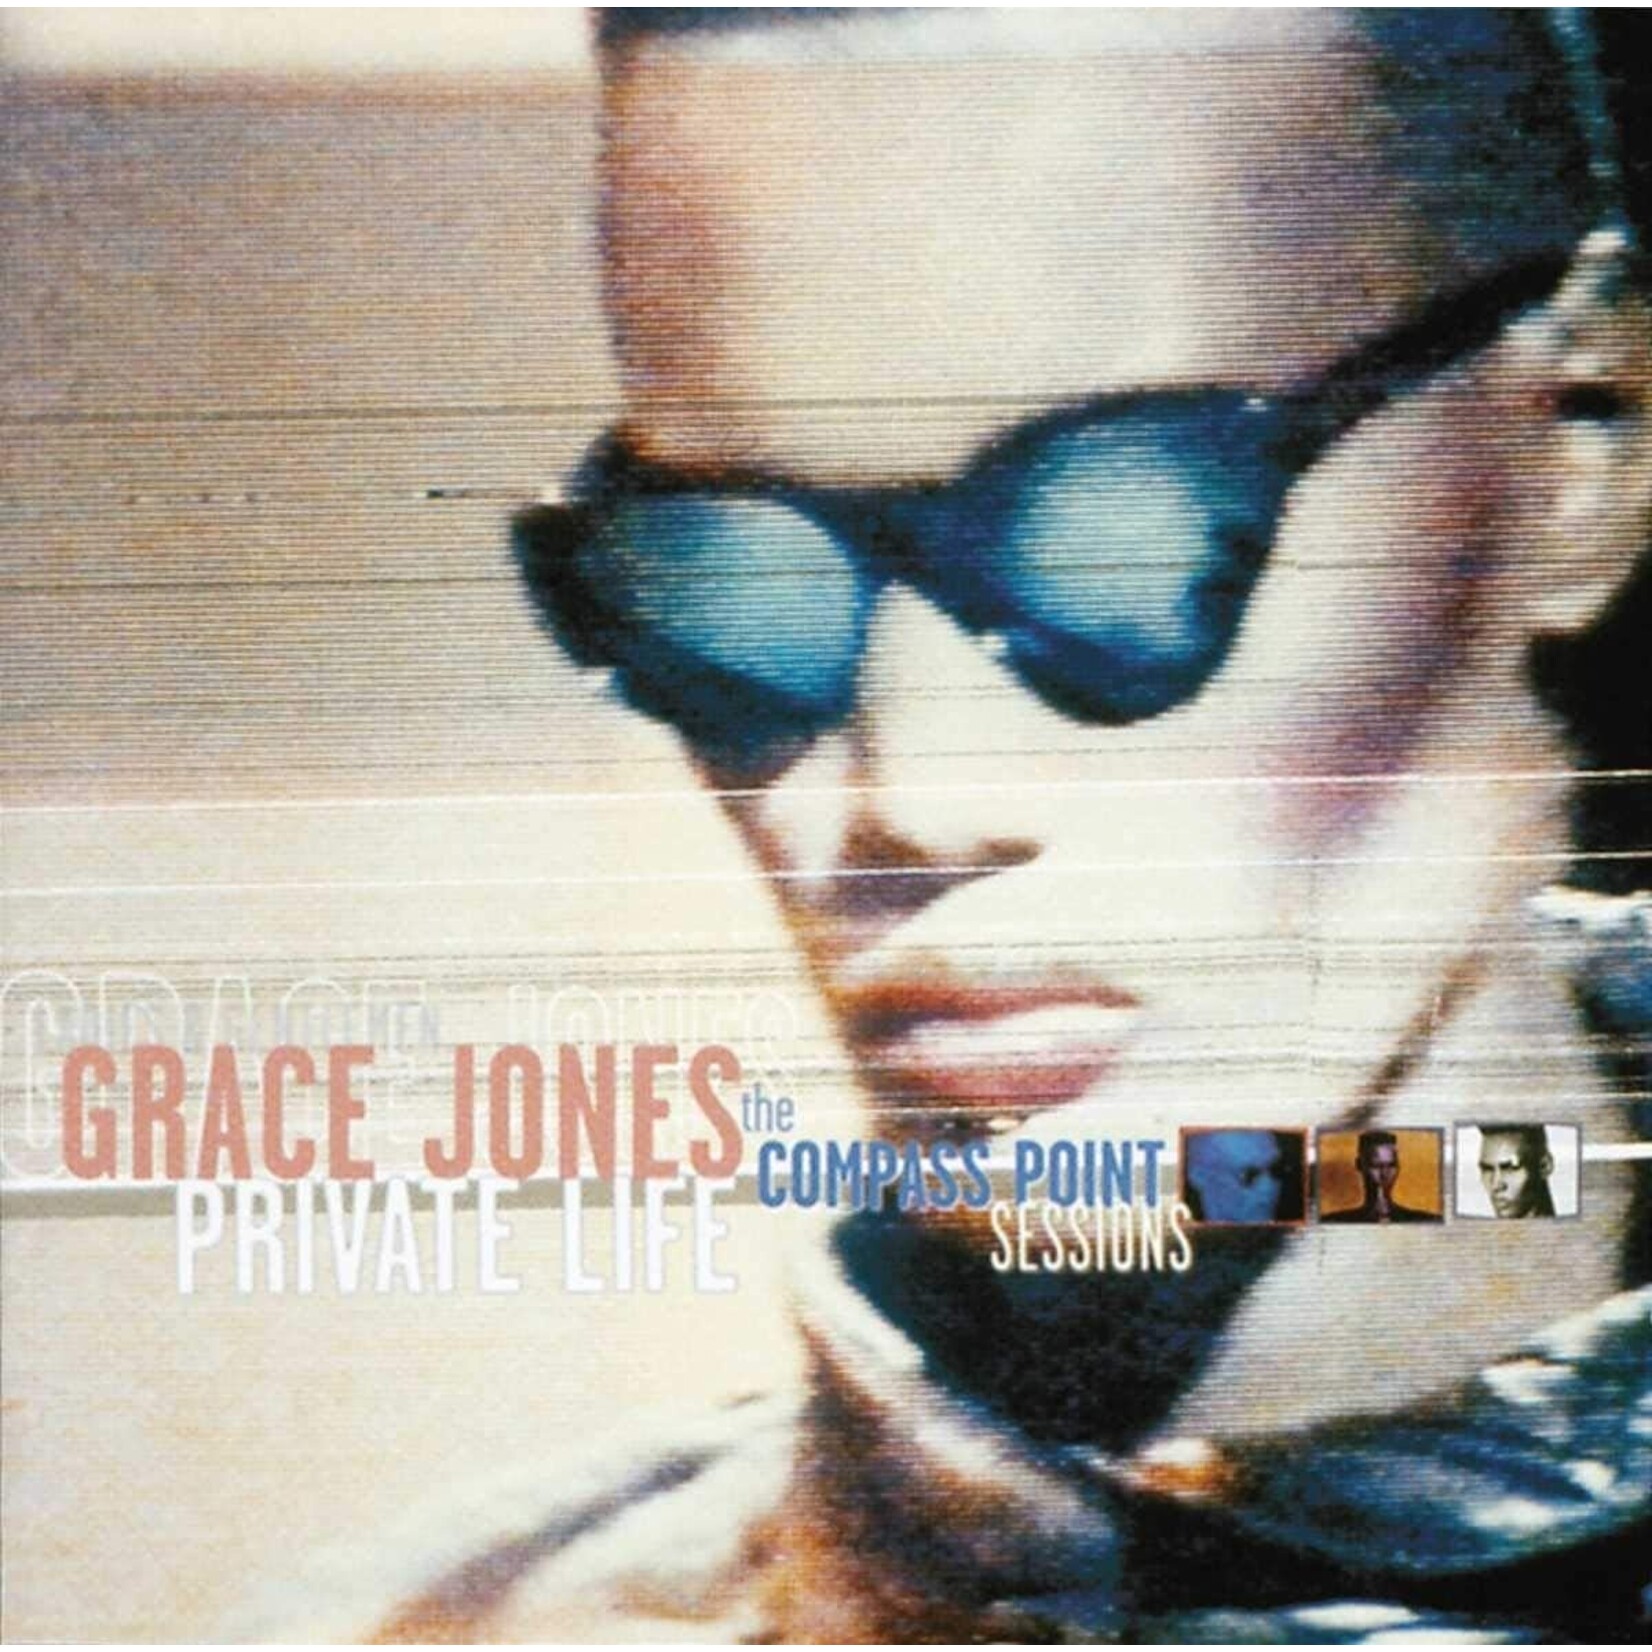 Grace Jones - Private Life: The Compass Point Sessions [USED 2CD]